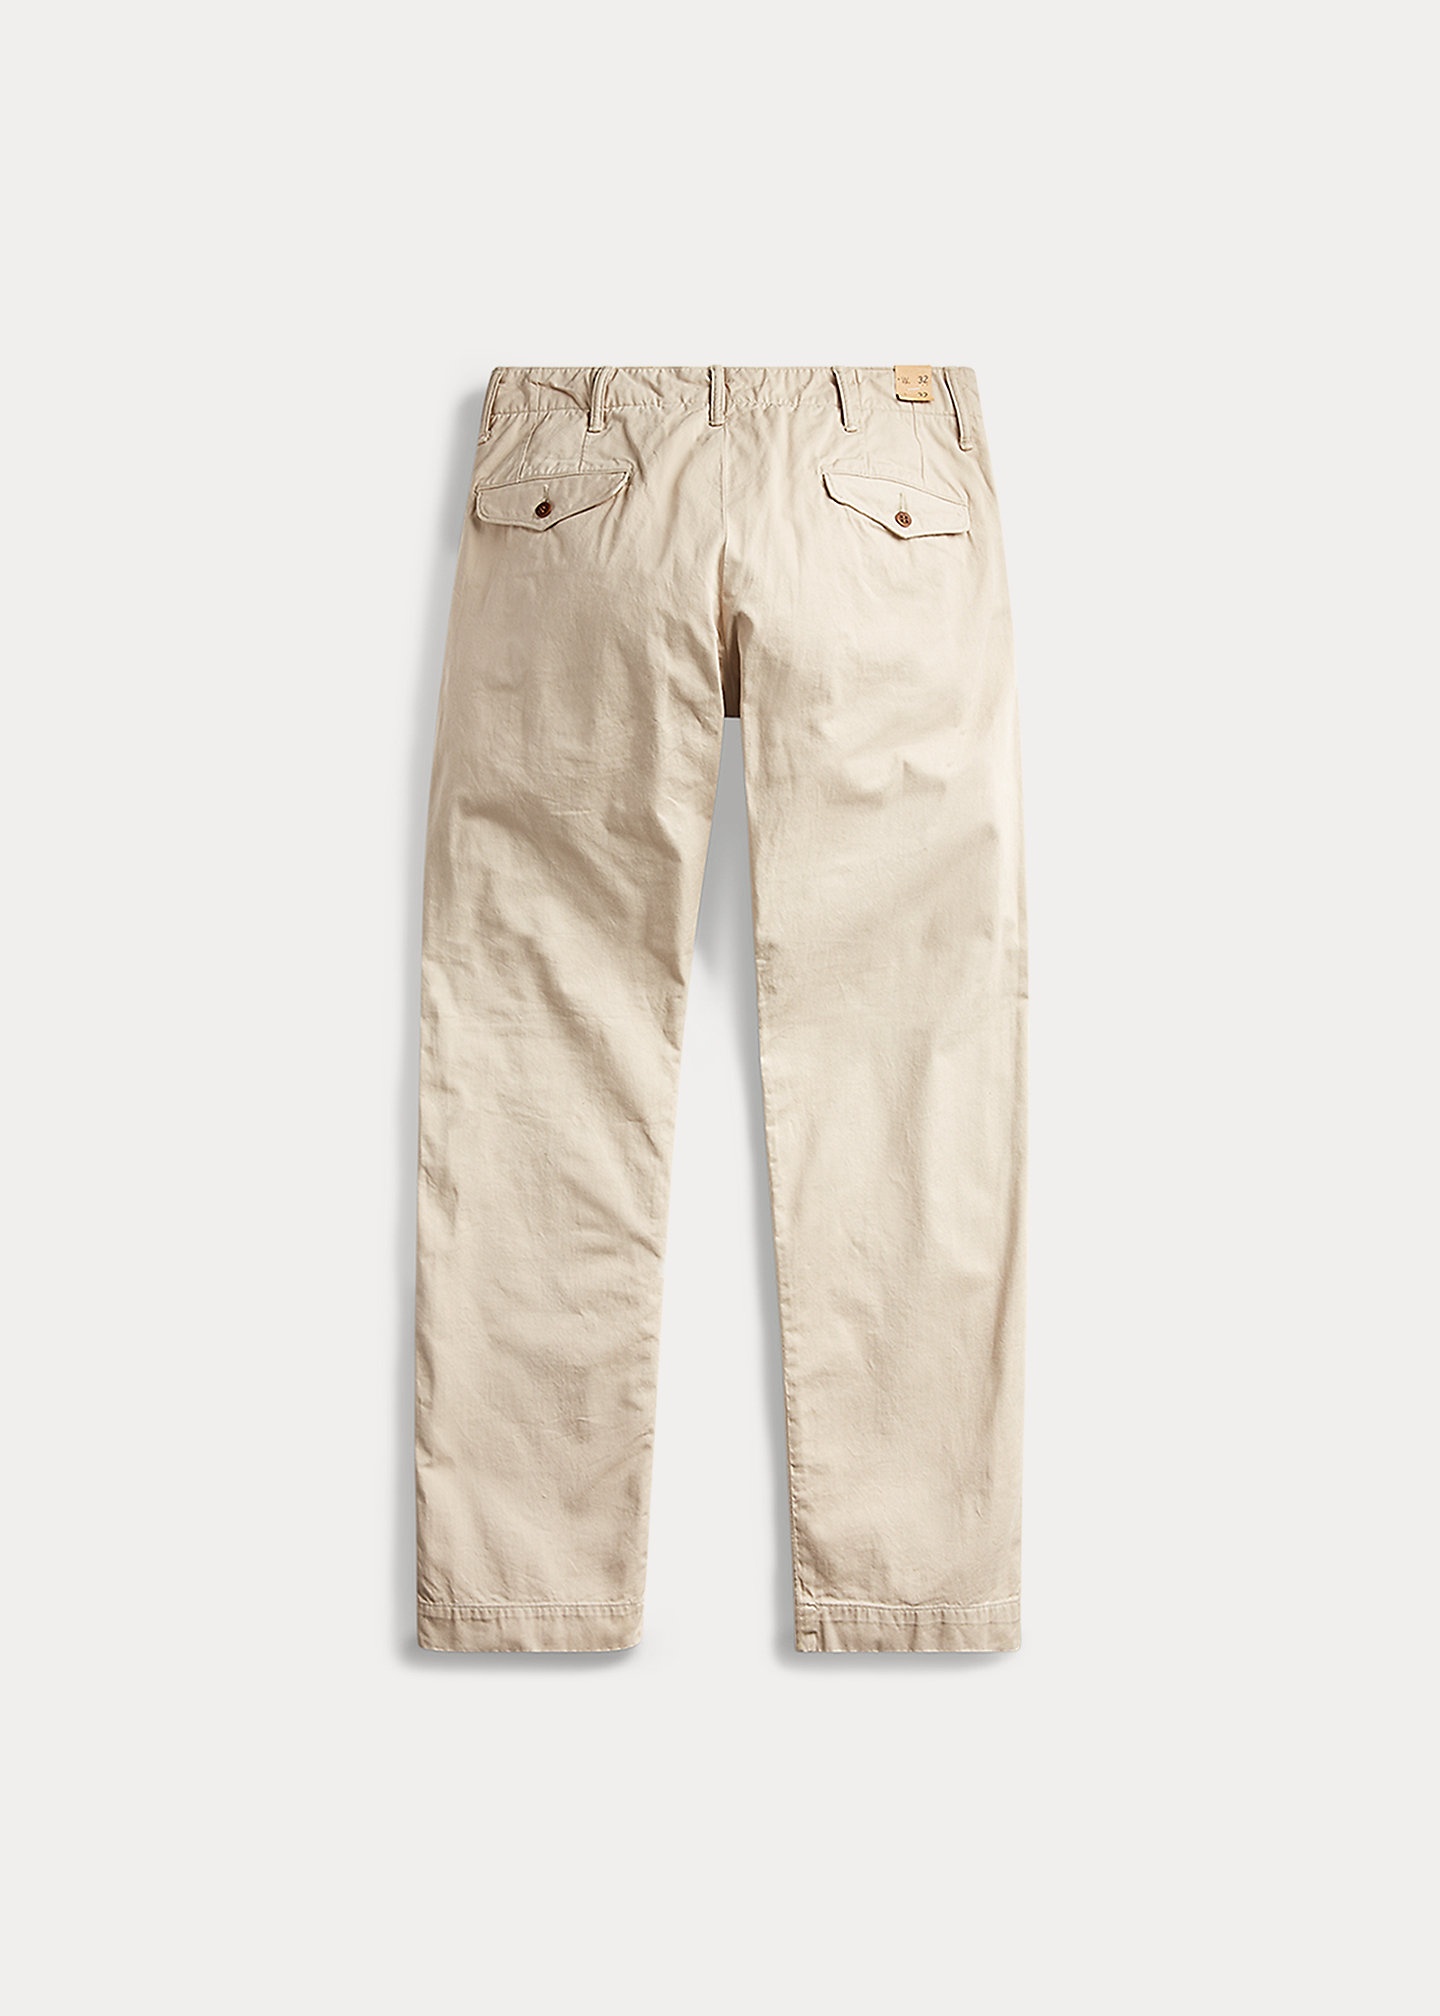 Officer’s Chino Pant - 2